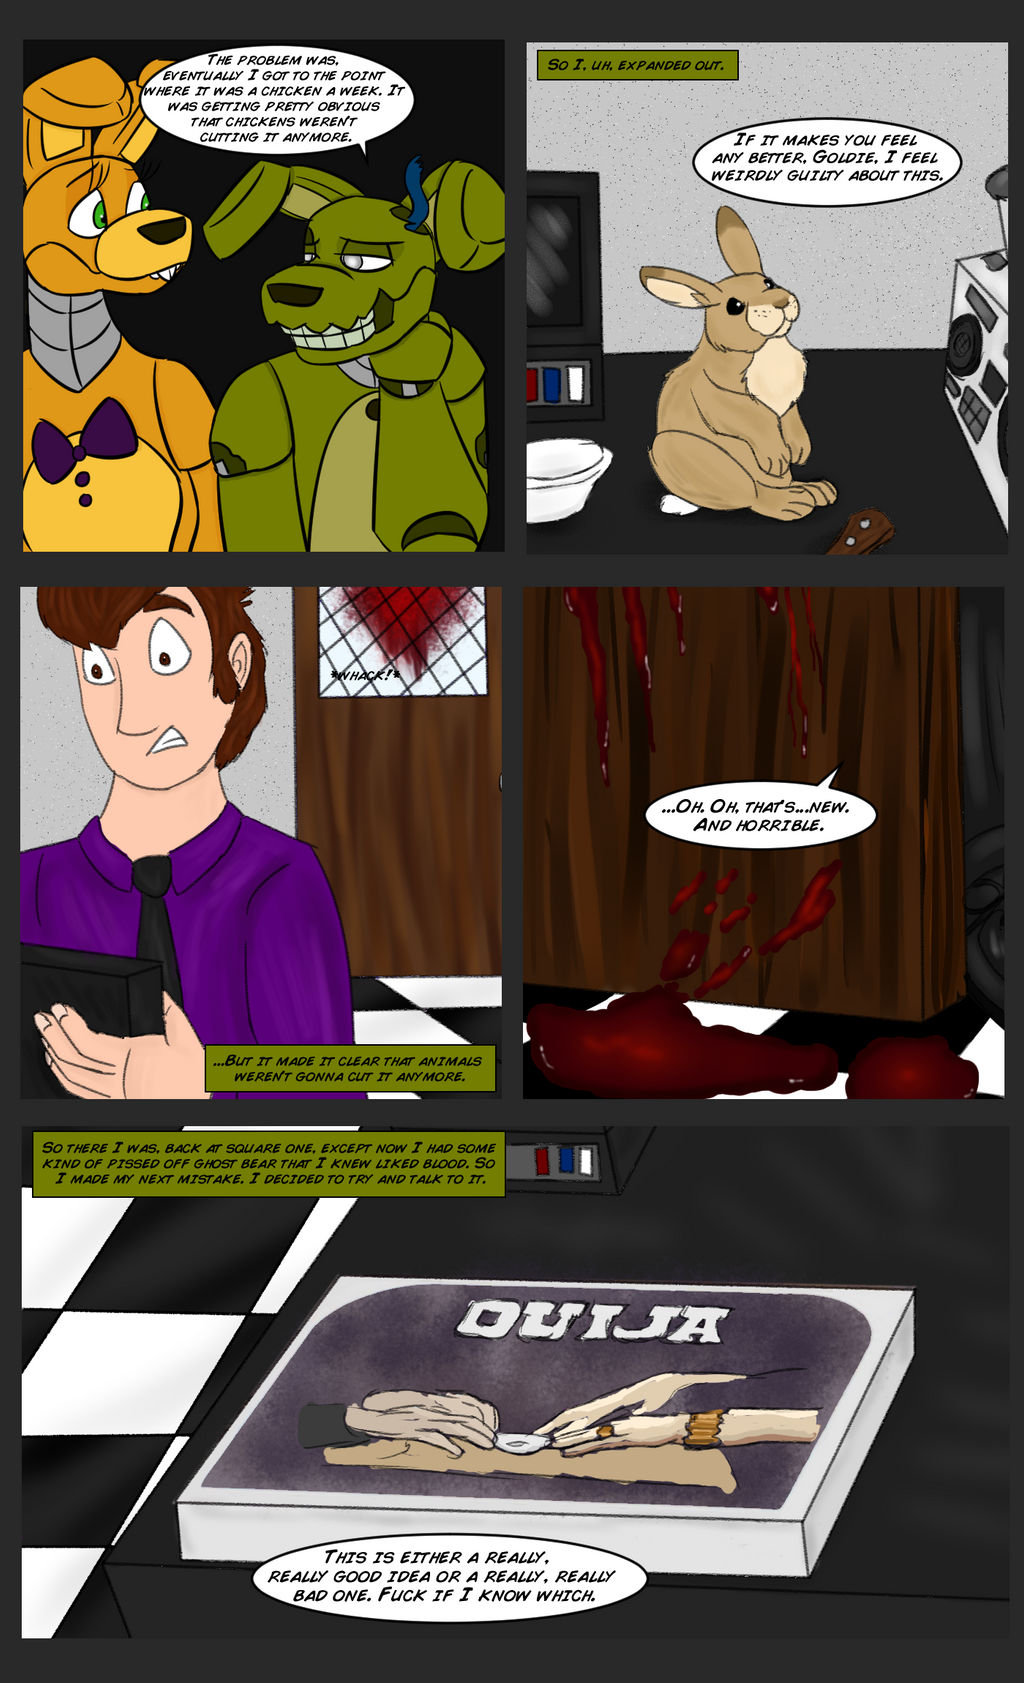 Back To Square One Comic Spring-trapped #98 - Mistakes Were Made by RuneVix on DeviantArt